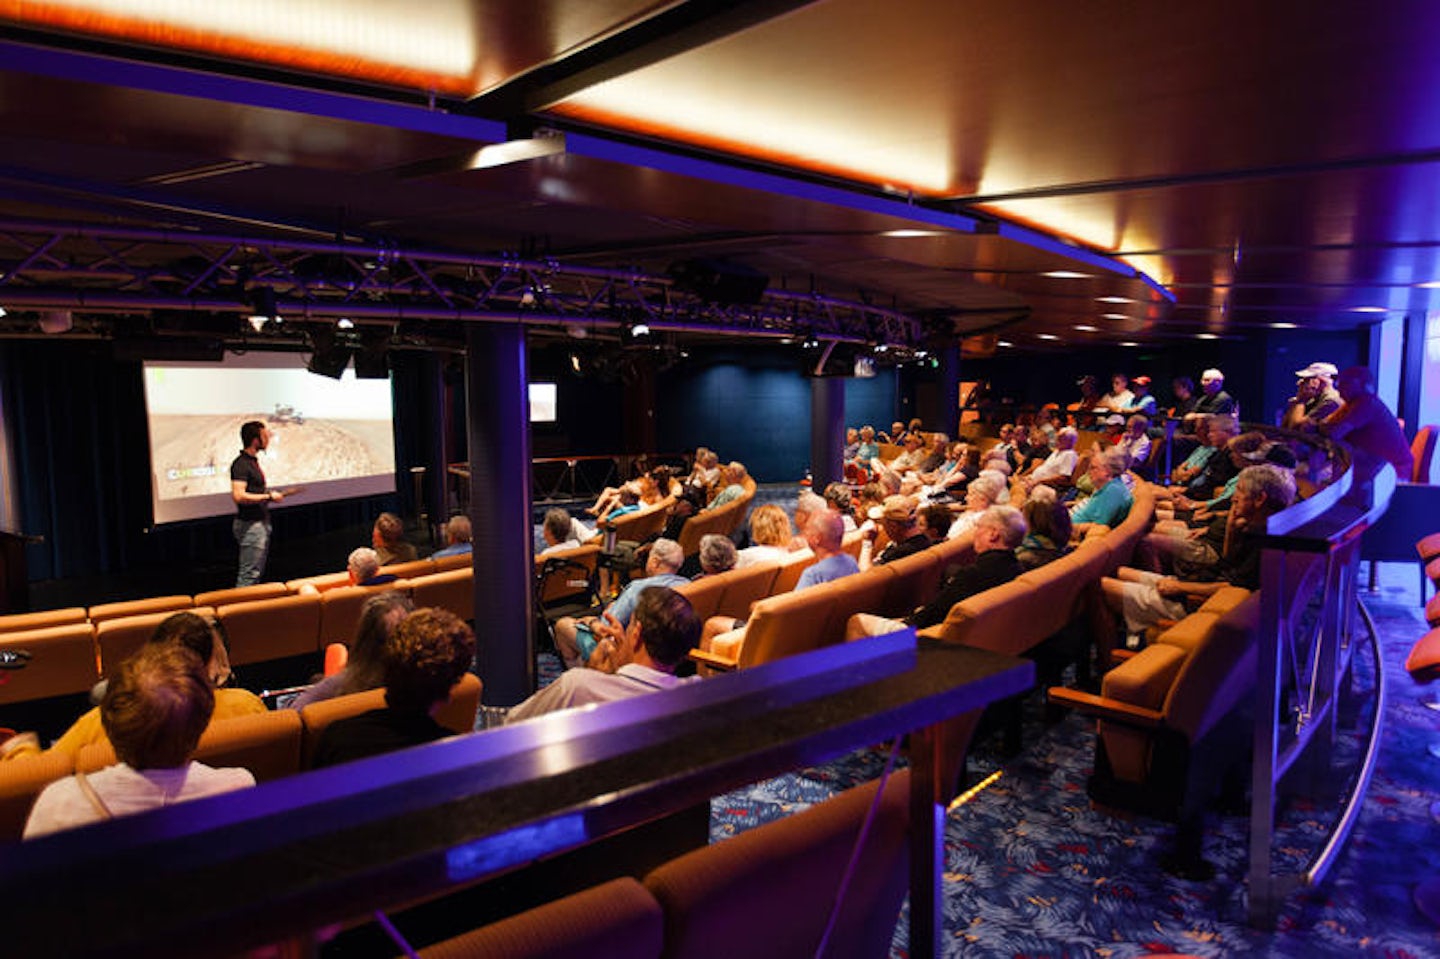 Celebrity Central on Celebrity Silhouette